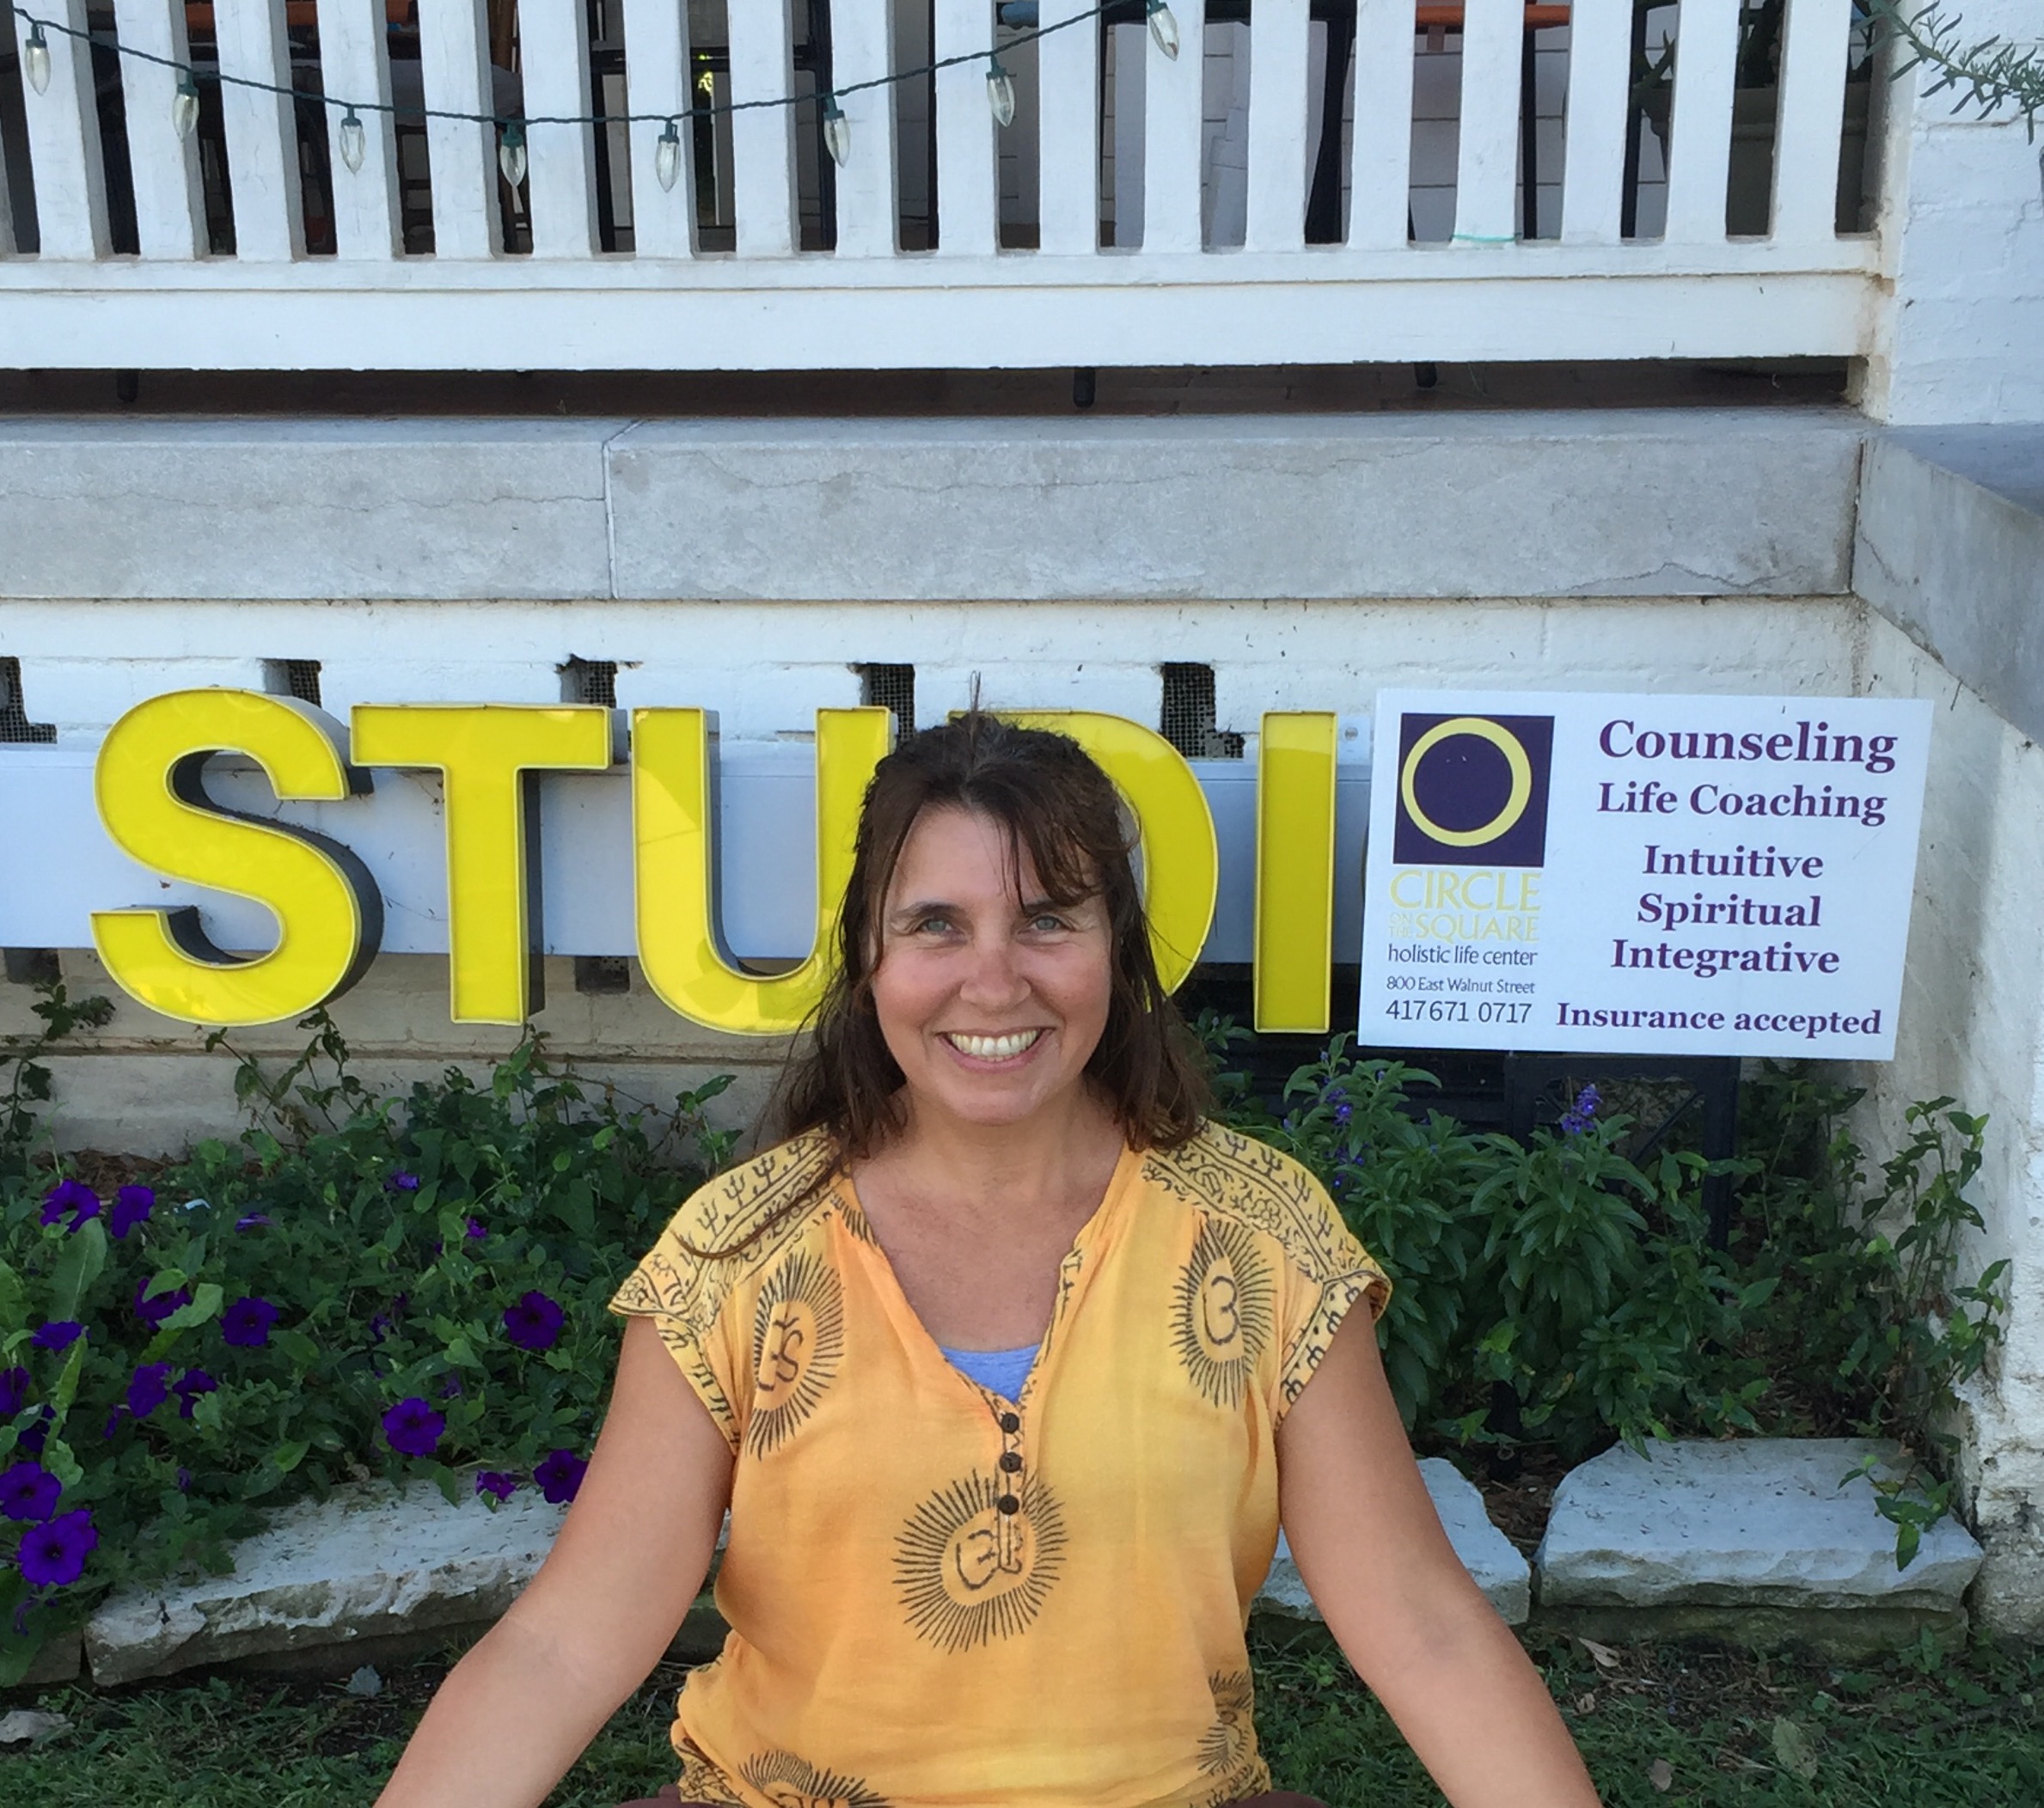 Candace Faith Frugé, manager and yoga instructor at Circle on the Square